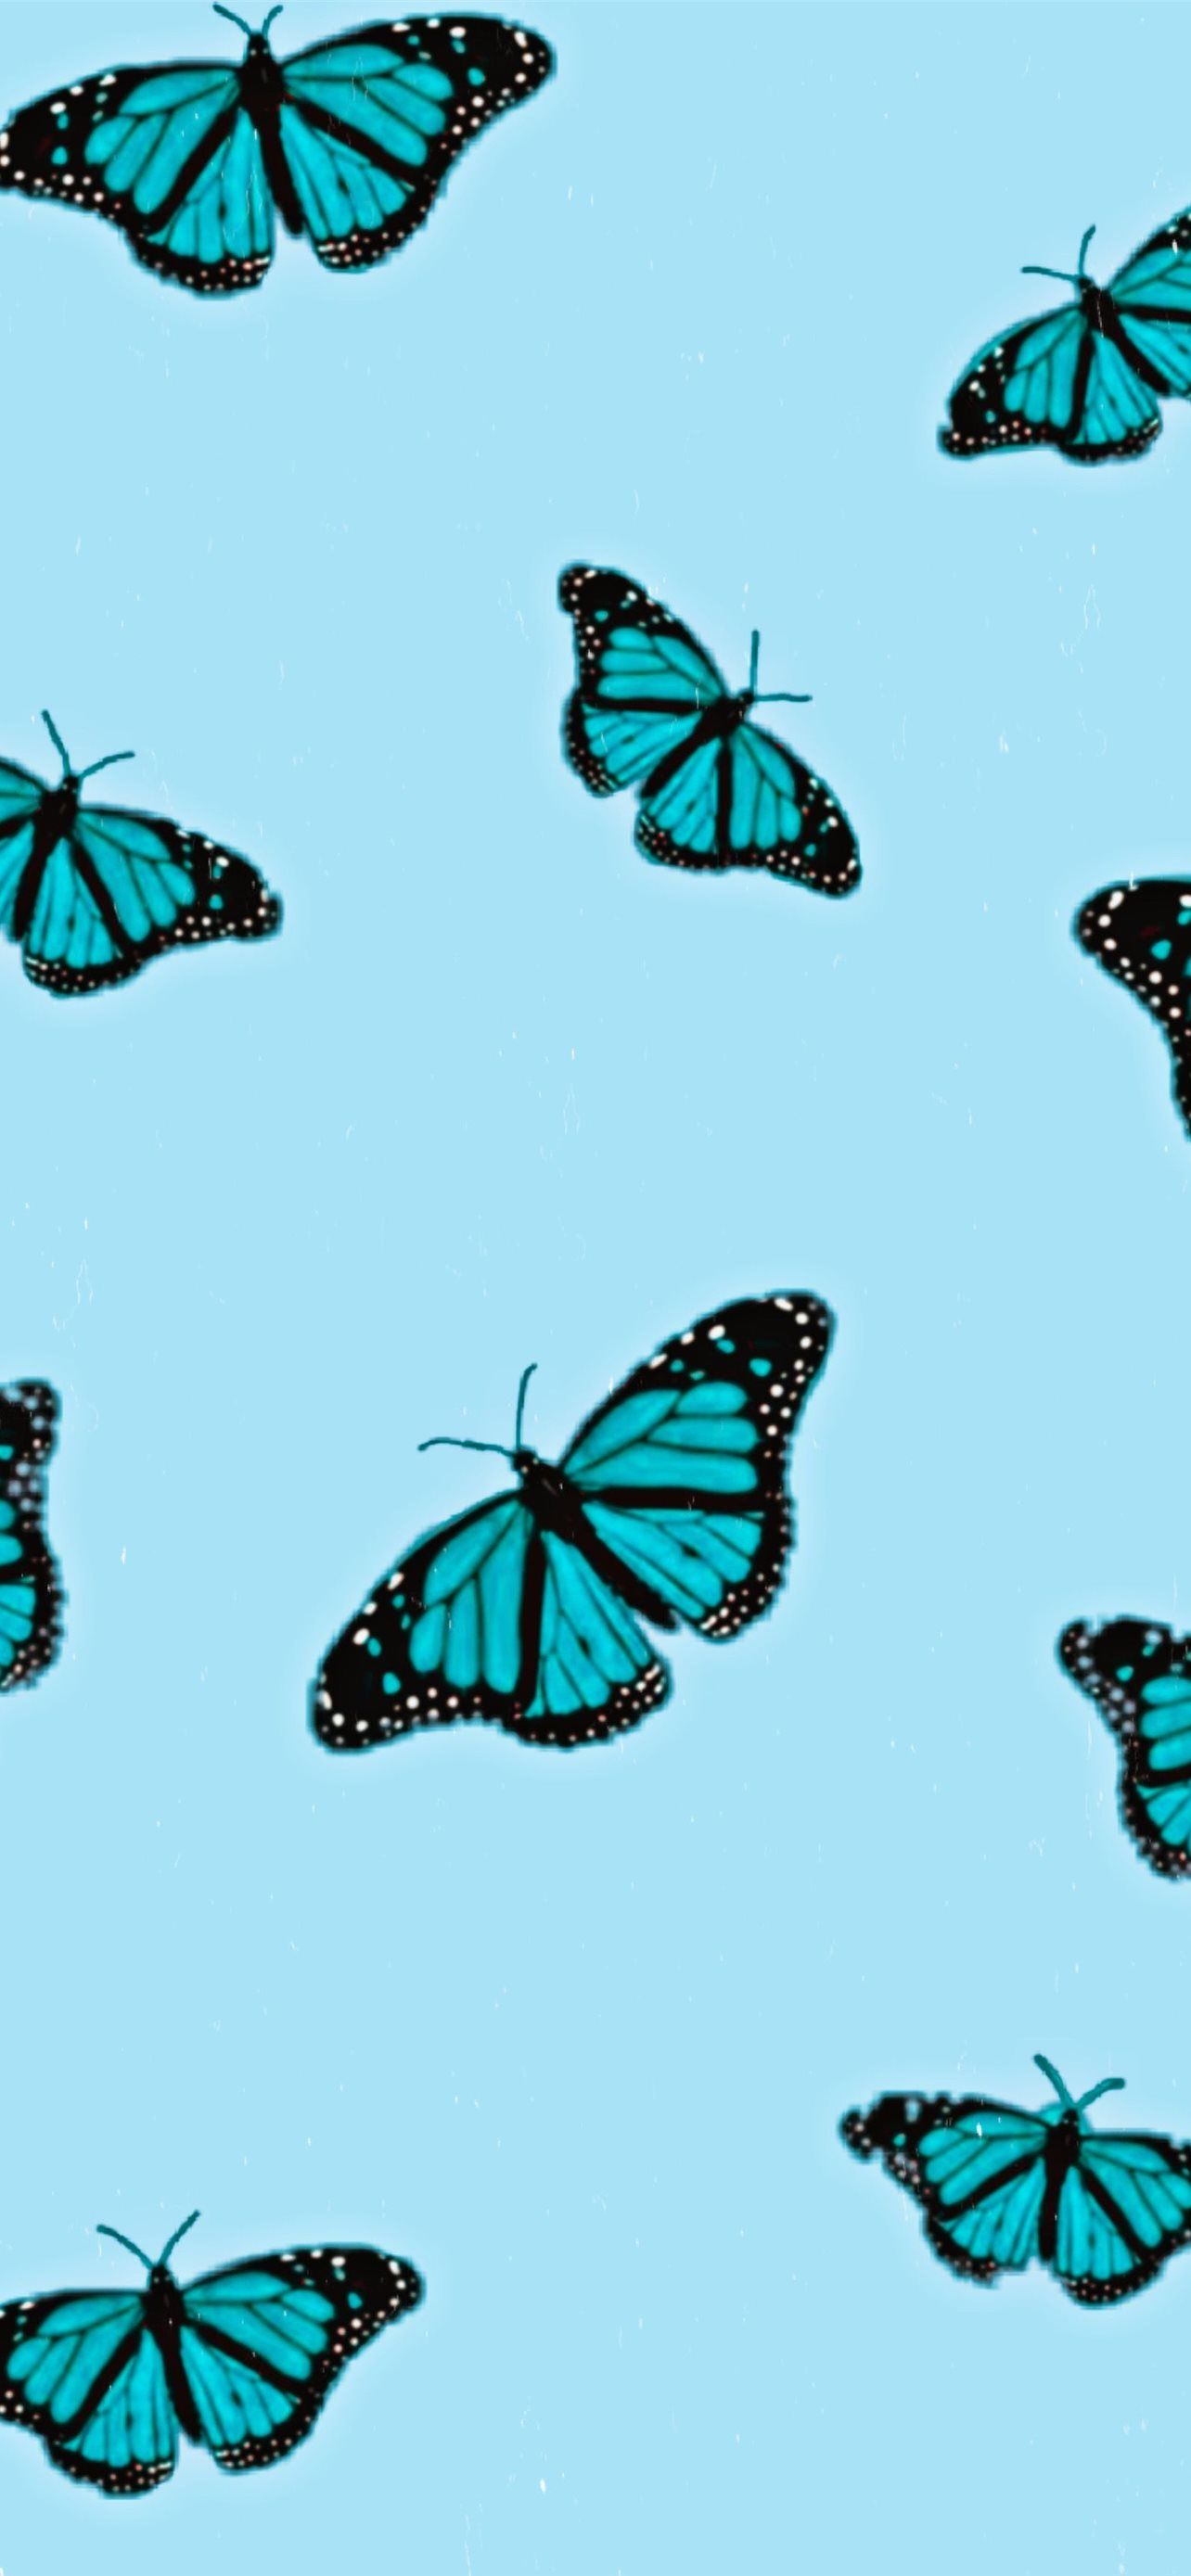 Aesthetic butterfly wallpaper for phone. - Teal, butterfly